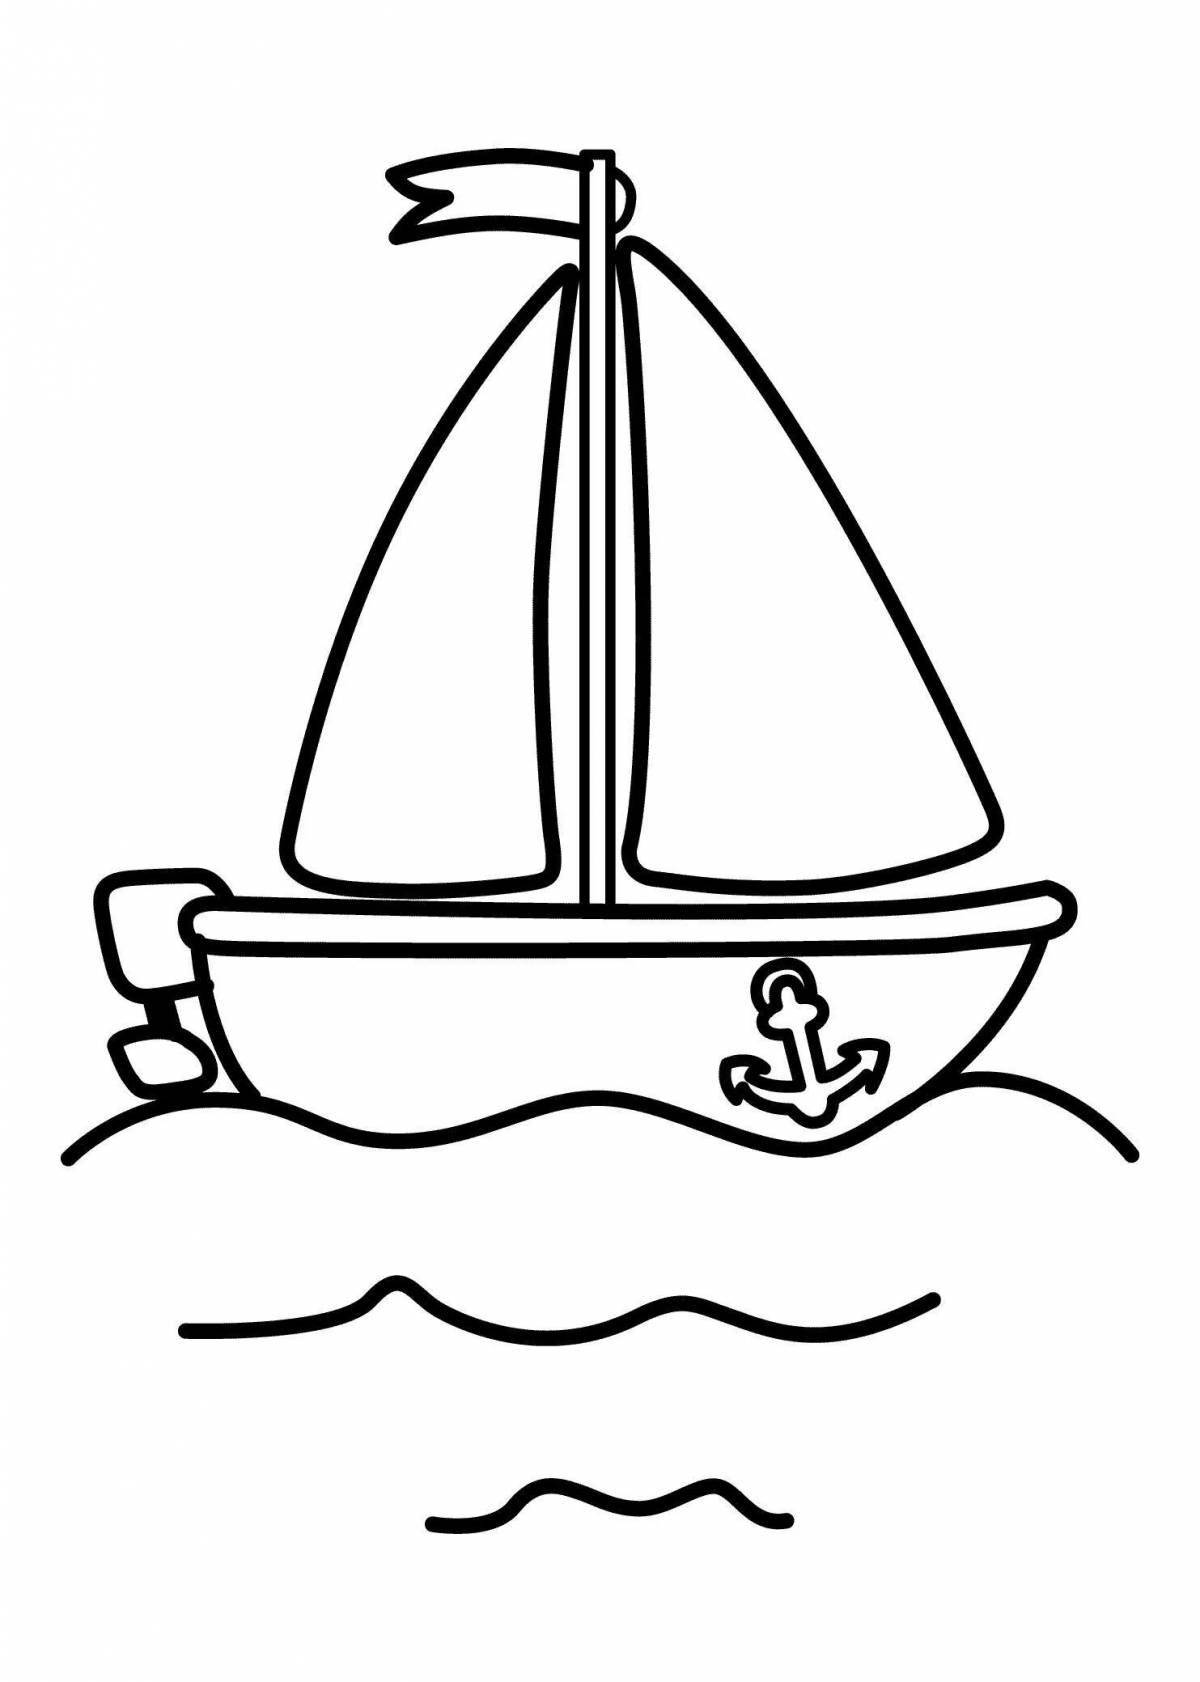 Adorable water transport coloring book for kids